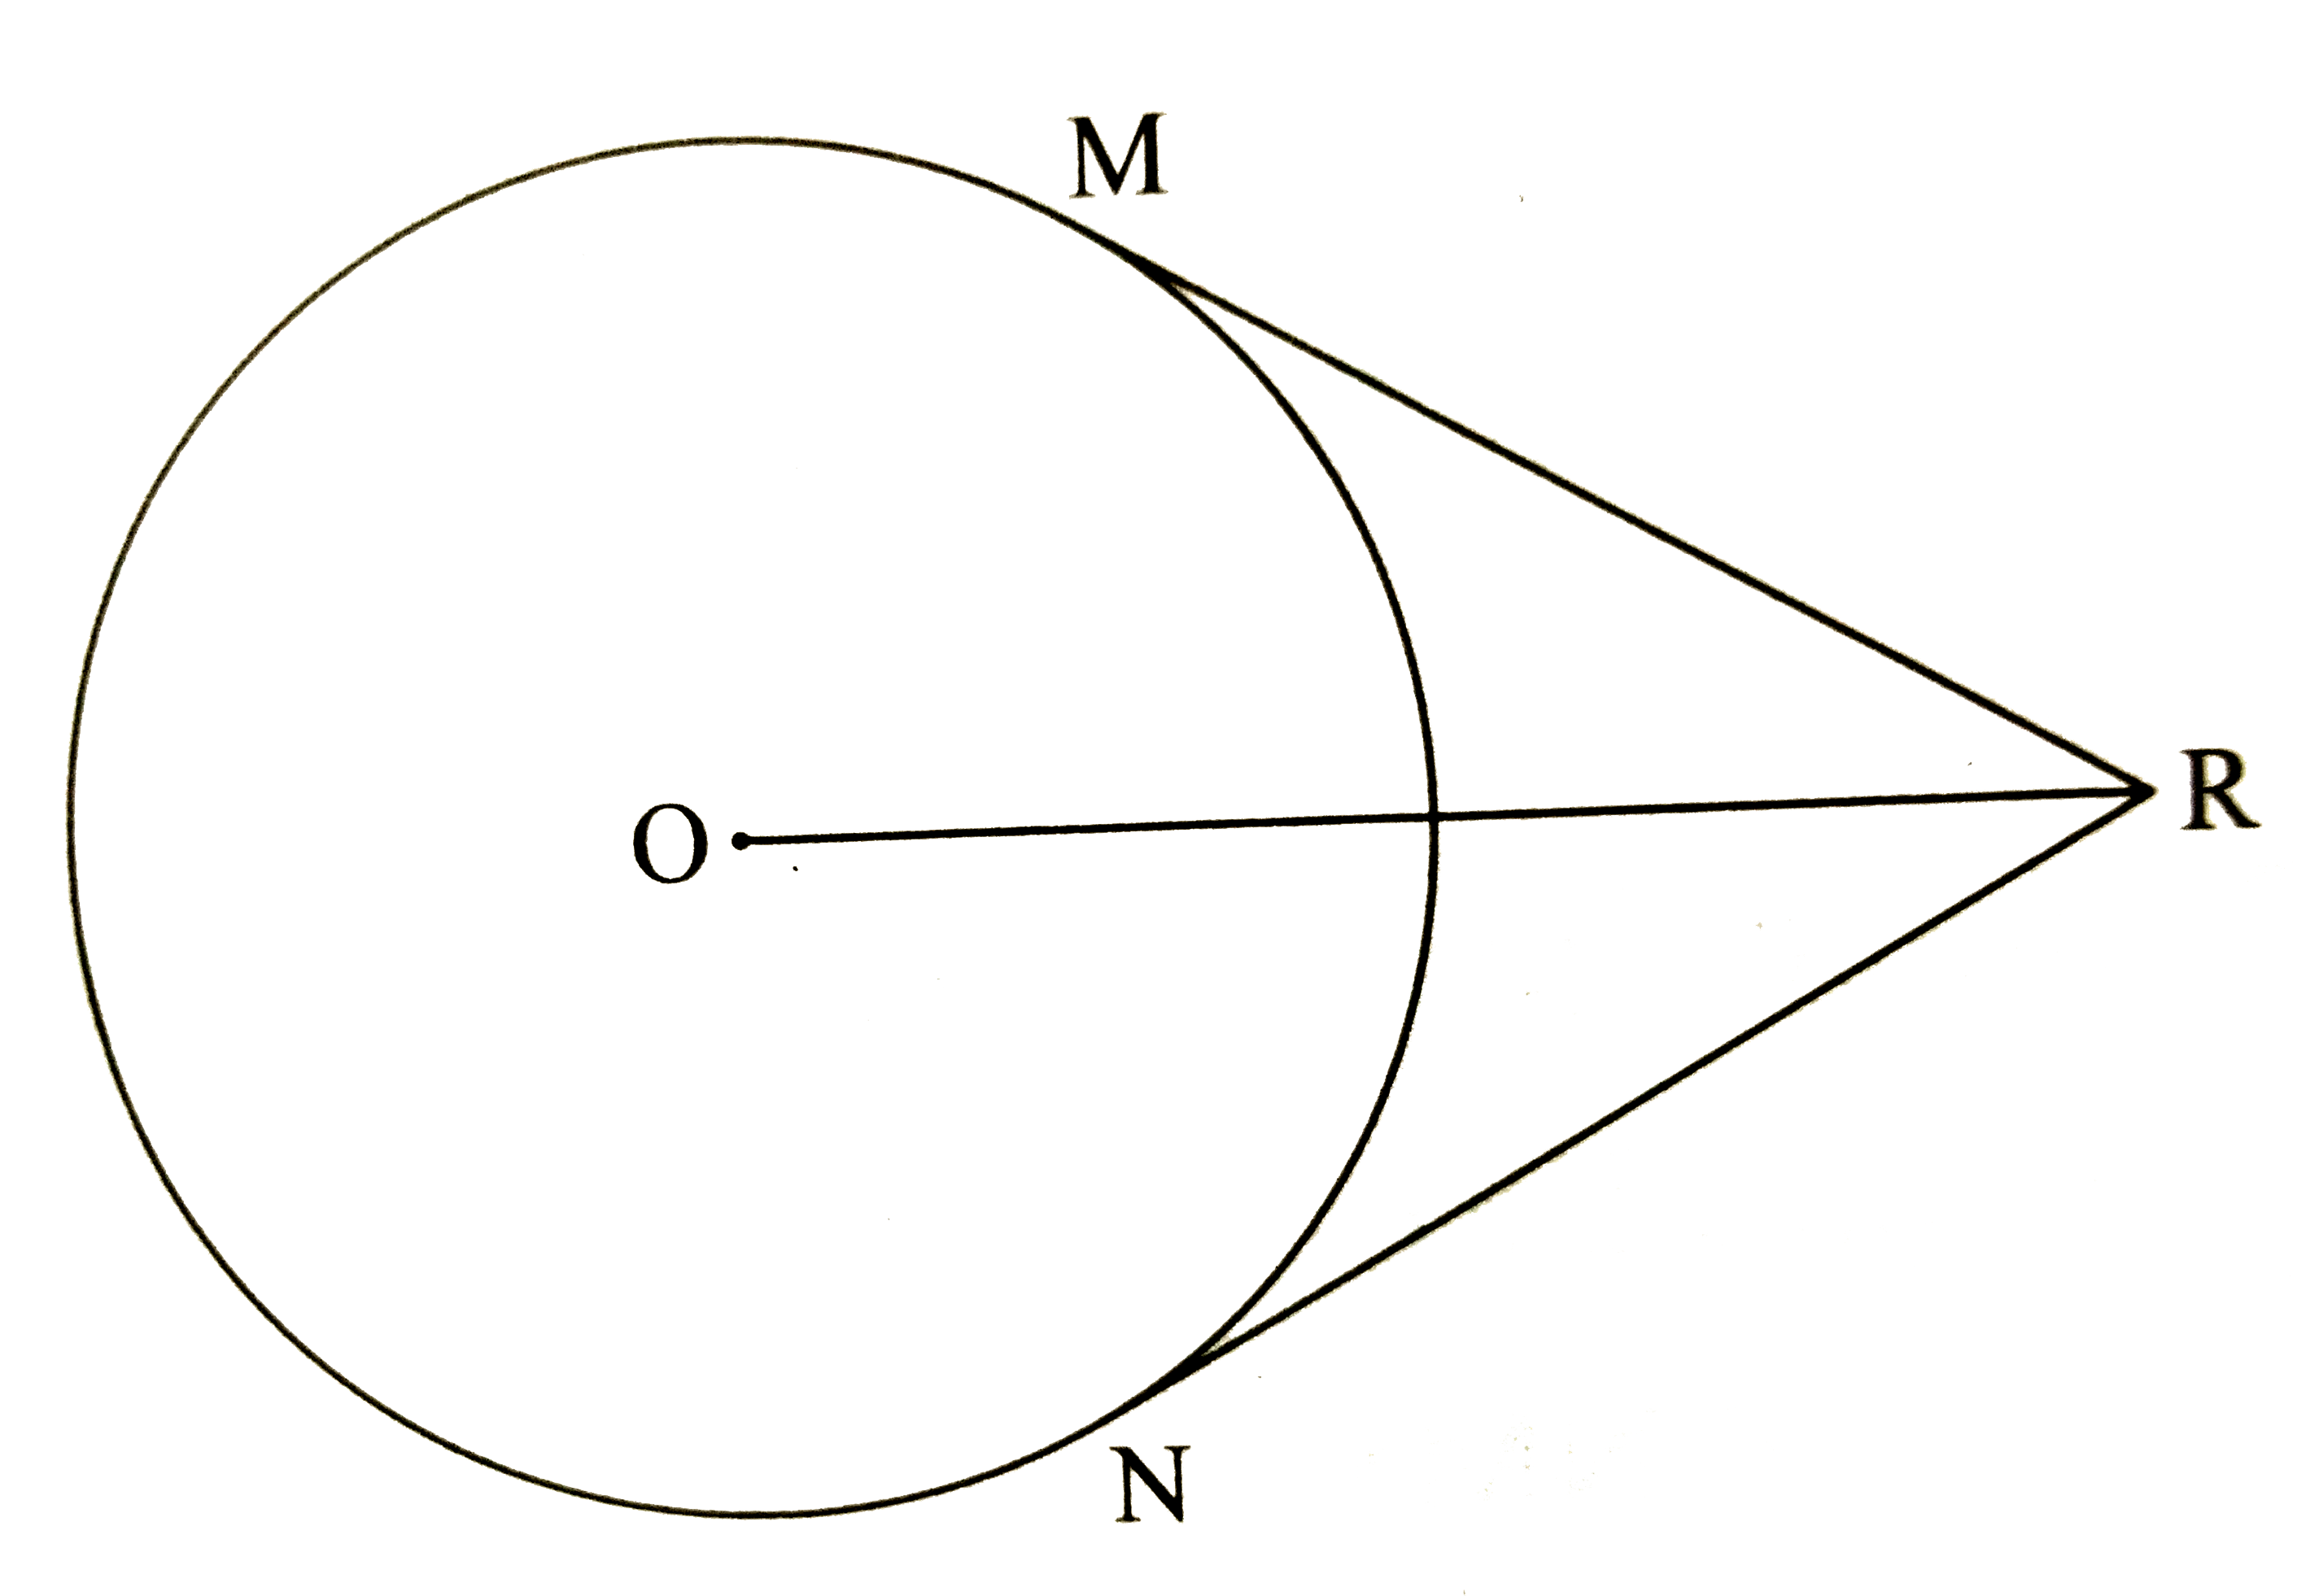 In the figure , O is the same of the circle. From point R, seg RM and seg RN are tangent segments touching the circle at M and N. If OR = 10cm  and radius of the circle = 5 cm, then   (i) What is the length of each tangnet segment ?   (iii) What si the measure of /MRO  ?   (iii) Whatis the measure of / MRN   ?